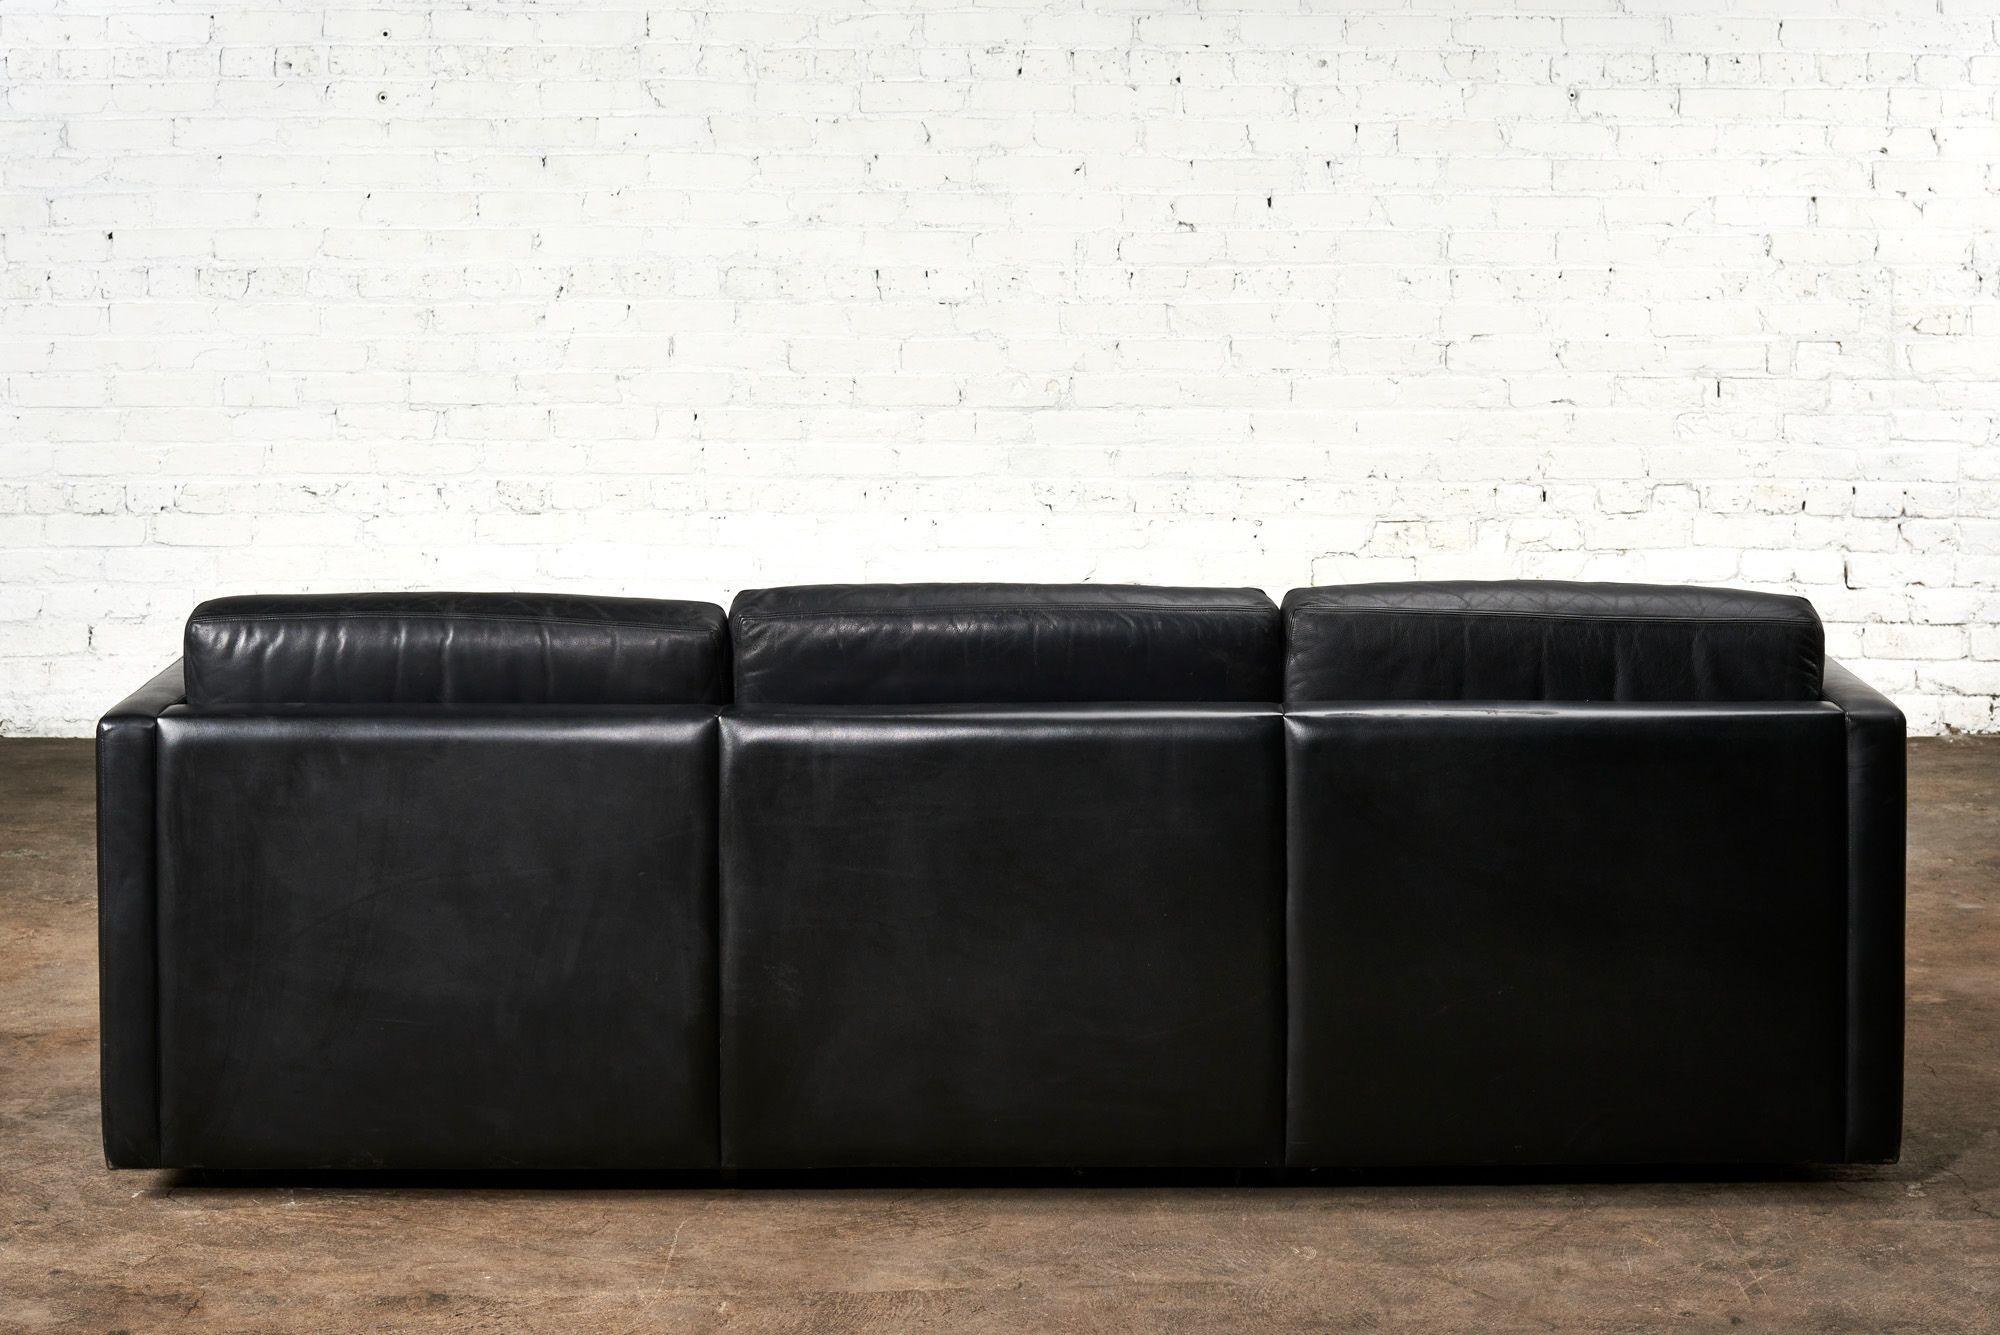 Knoll Pfister Black Leather Sofa, 1971 In Good Condition For Sale In Chicago, IL